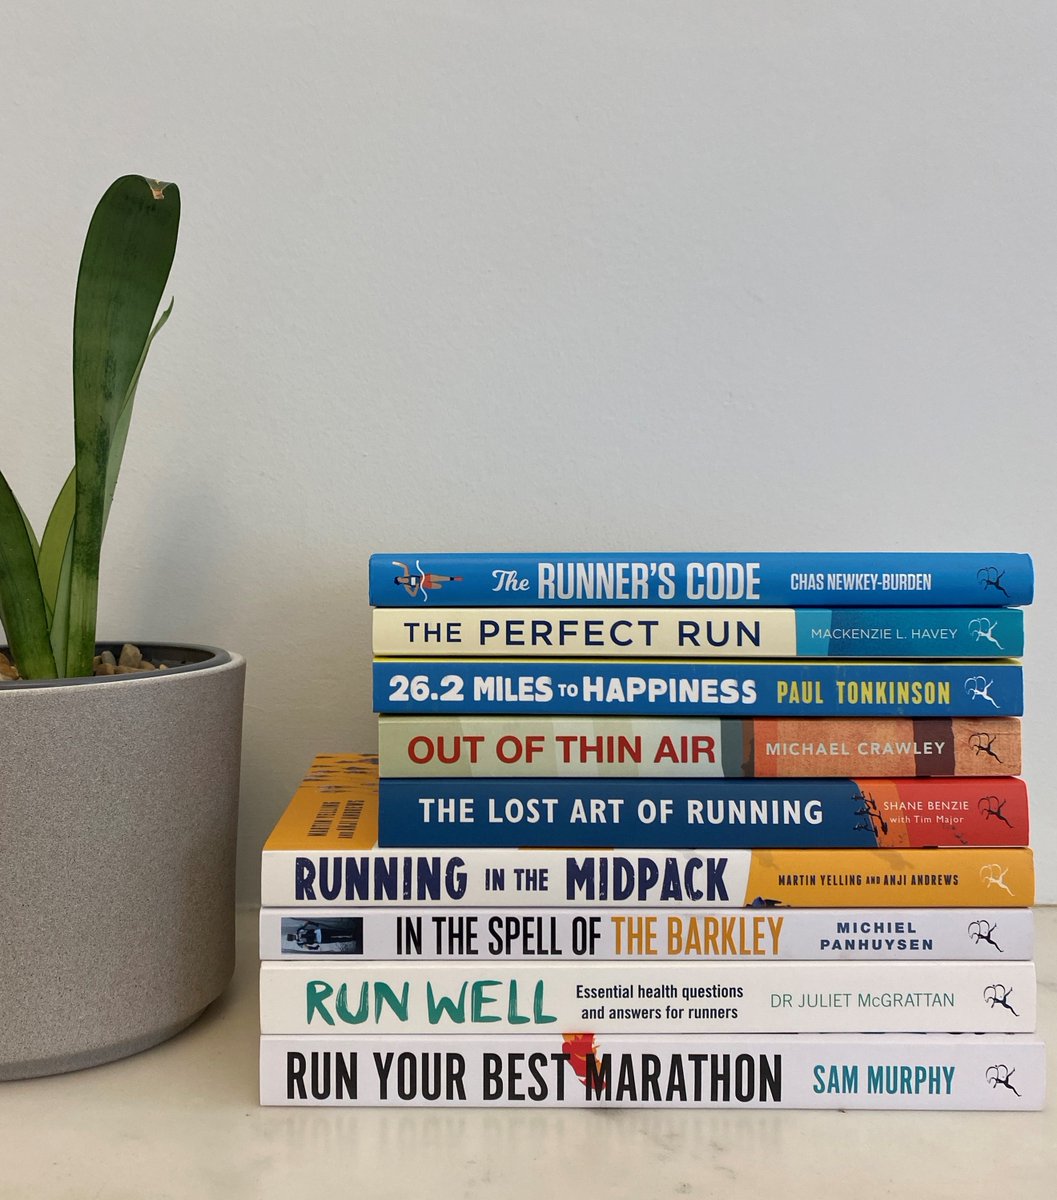 If you’ve been inspired to dust off your trainers and go for a run this weekend, why not check out our range of running titles to get you started? From practical tips to inspiring stories, follow the below link to find out more! 🏃 🏃 bit.ly/3Q2BcXR #LondonMarathon